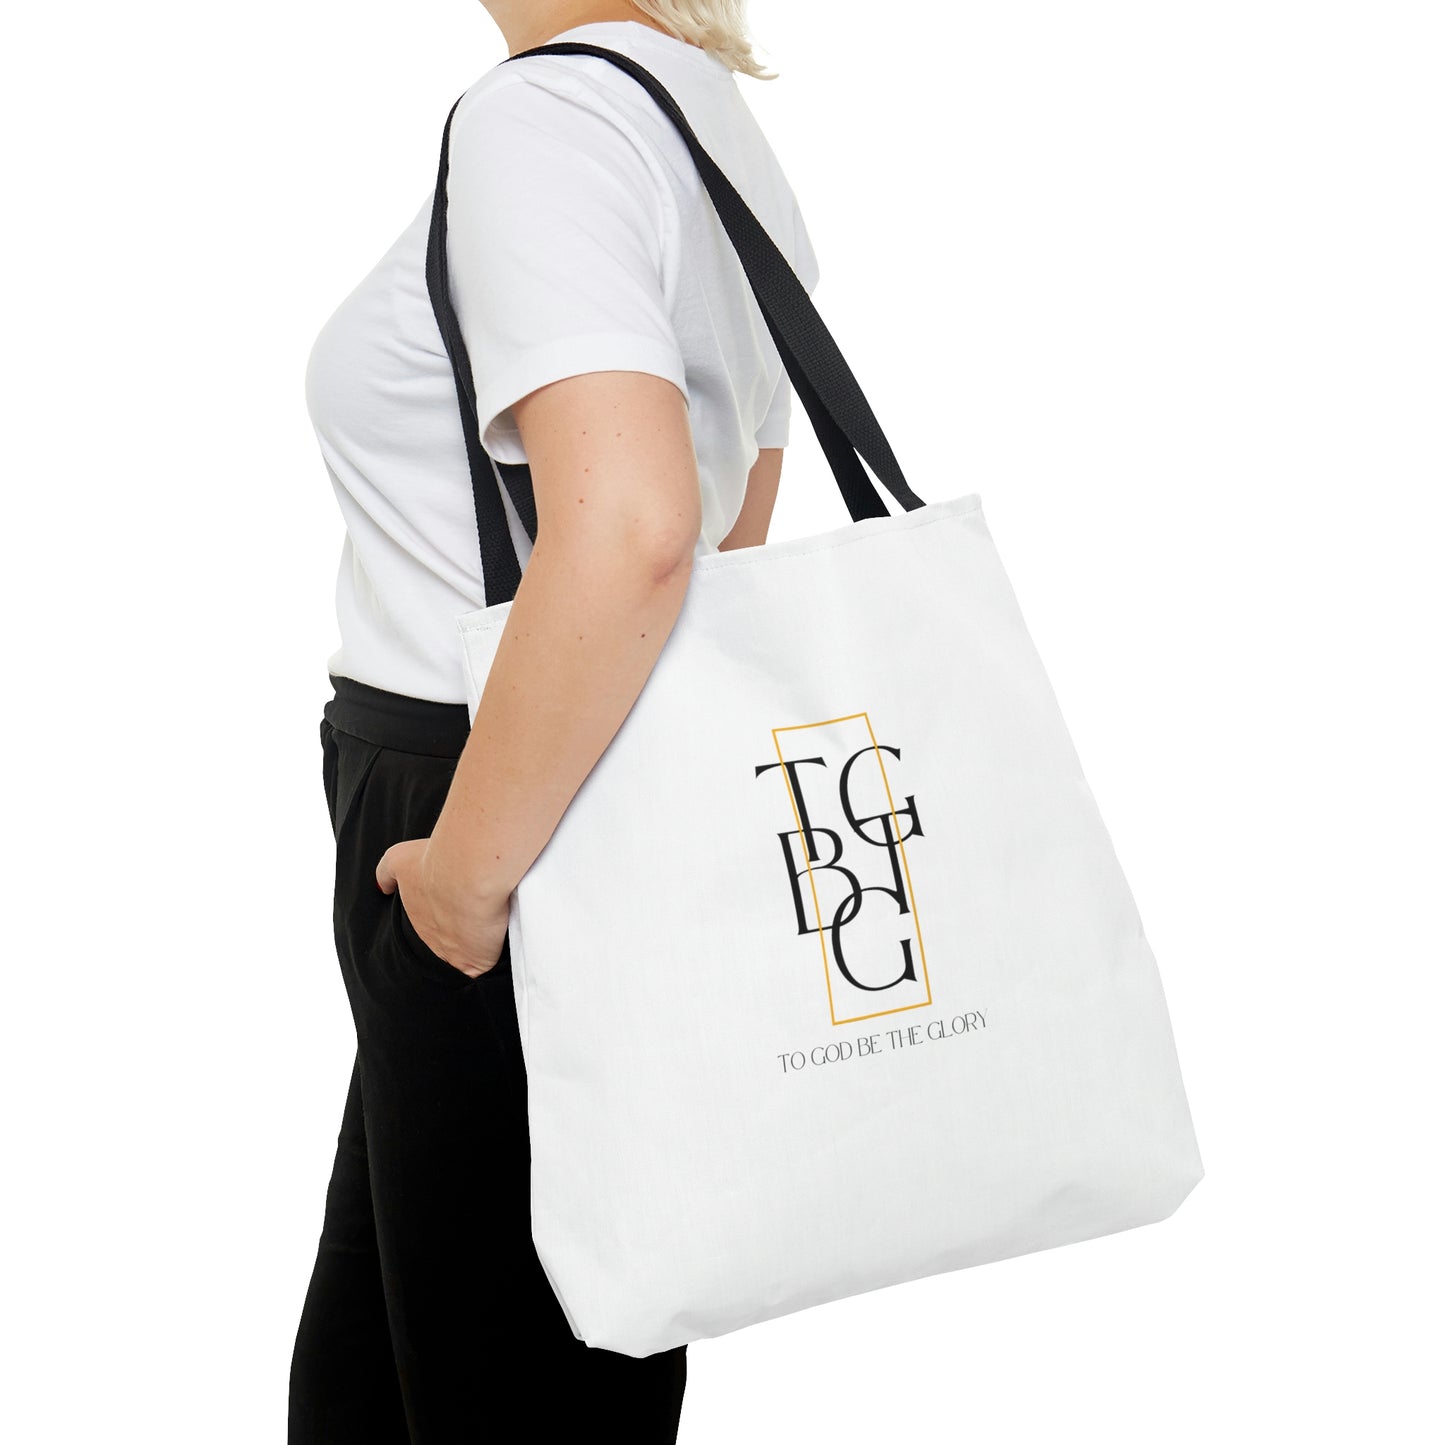 To God Be the Glory Tote